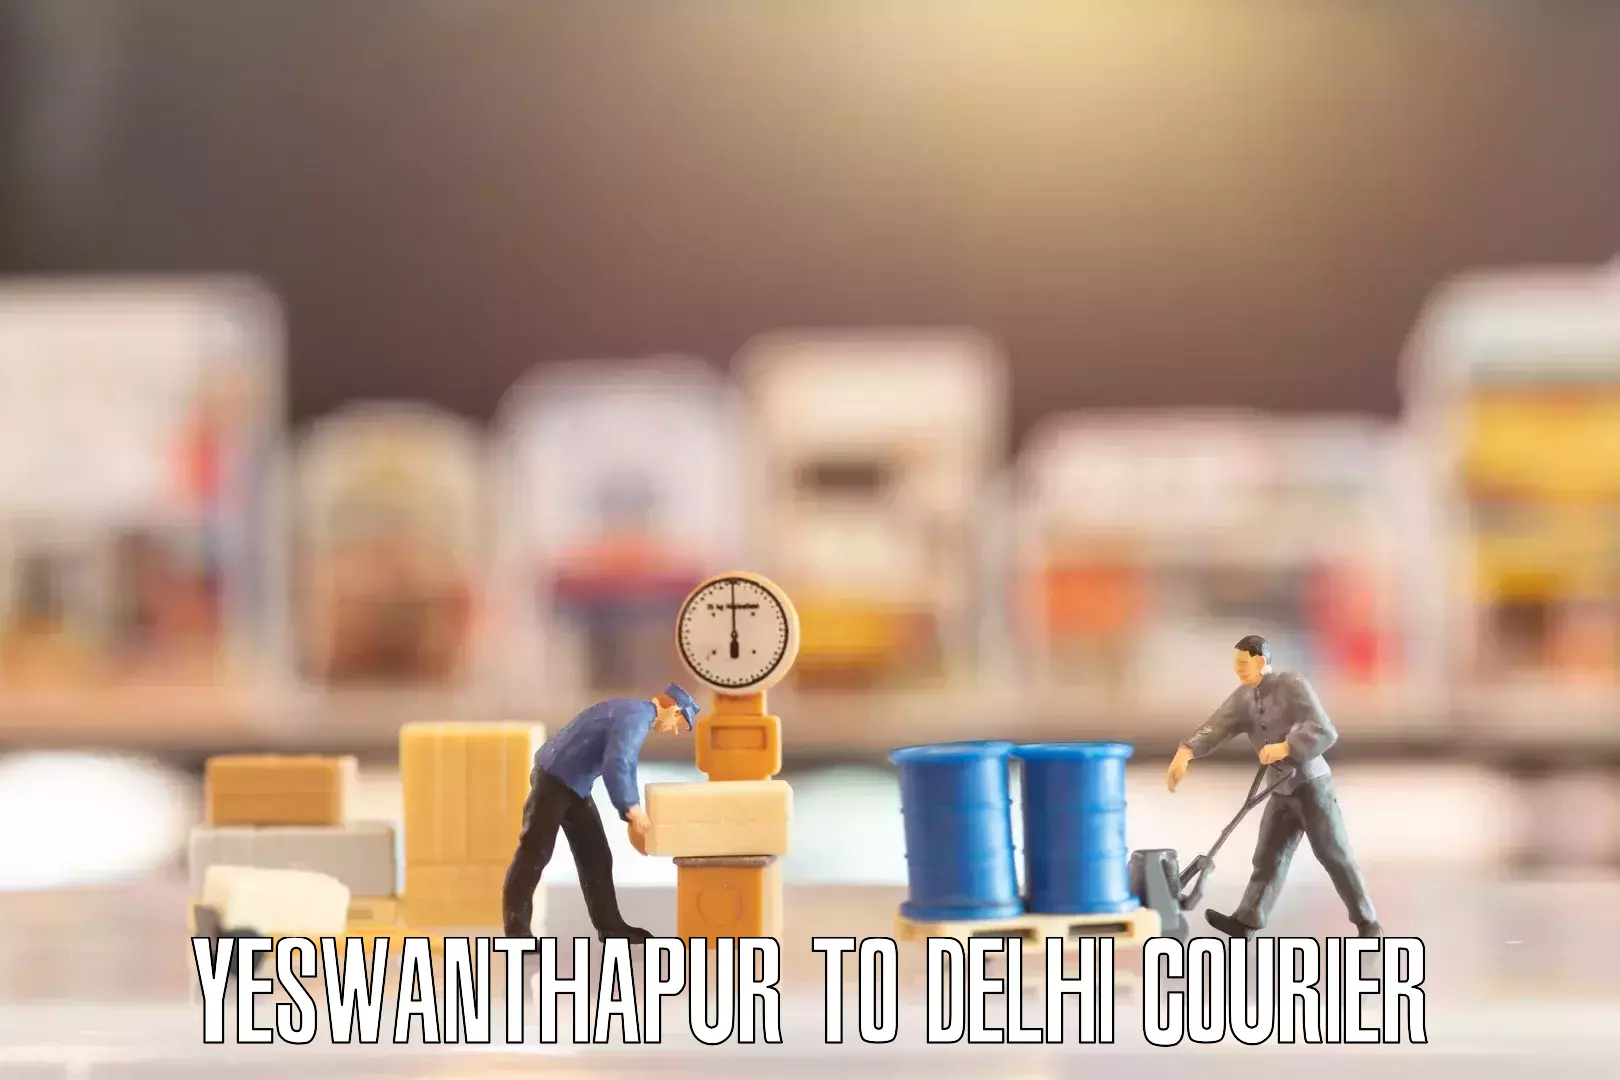 Smooth moving experience Yeswanthapur to Sansad Marg